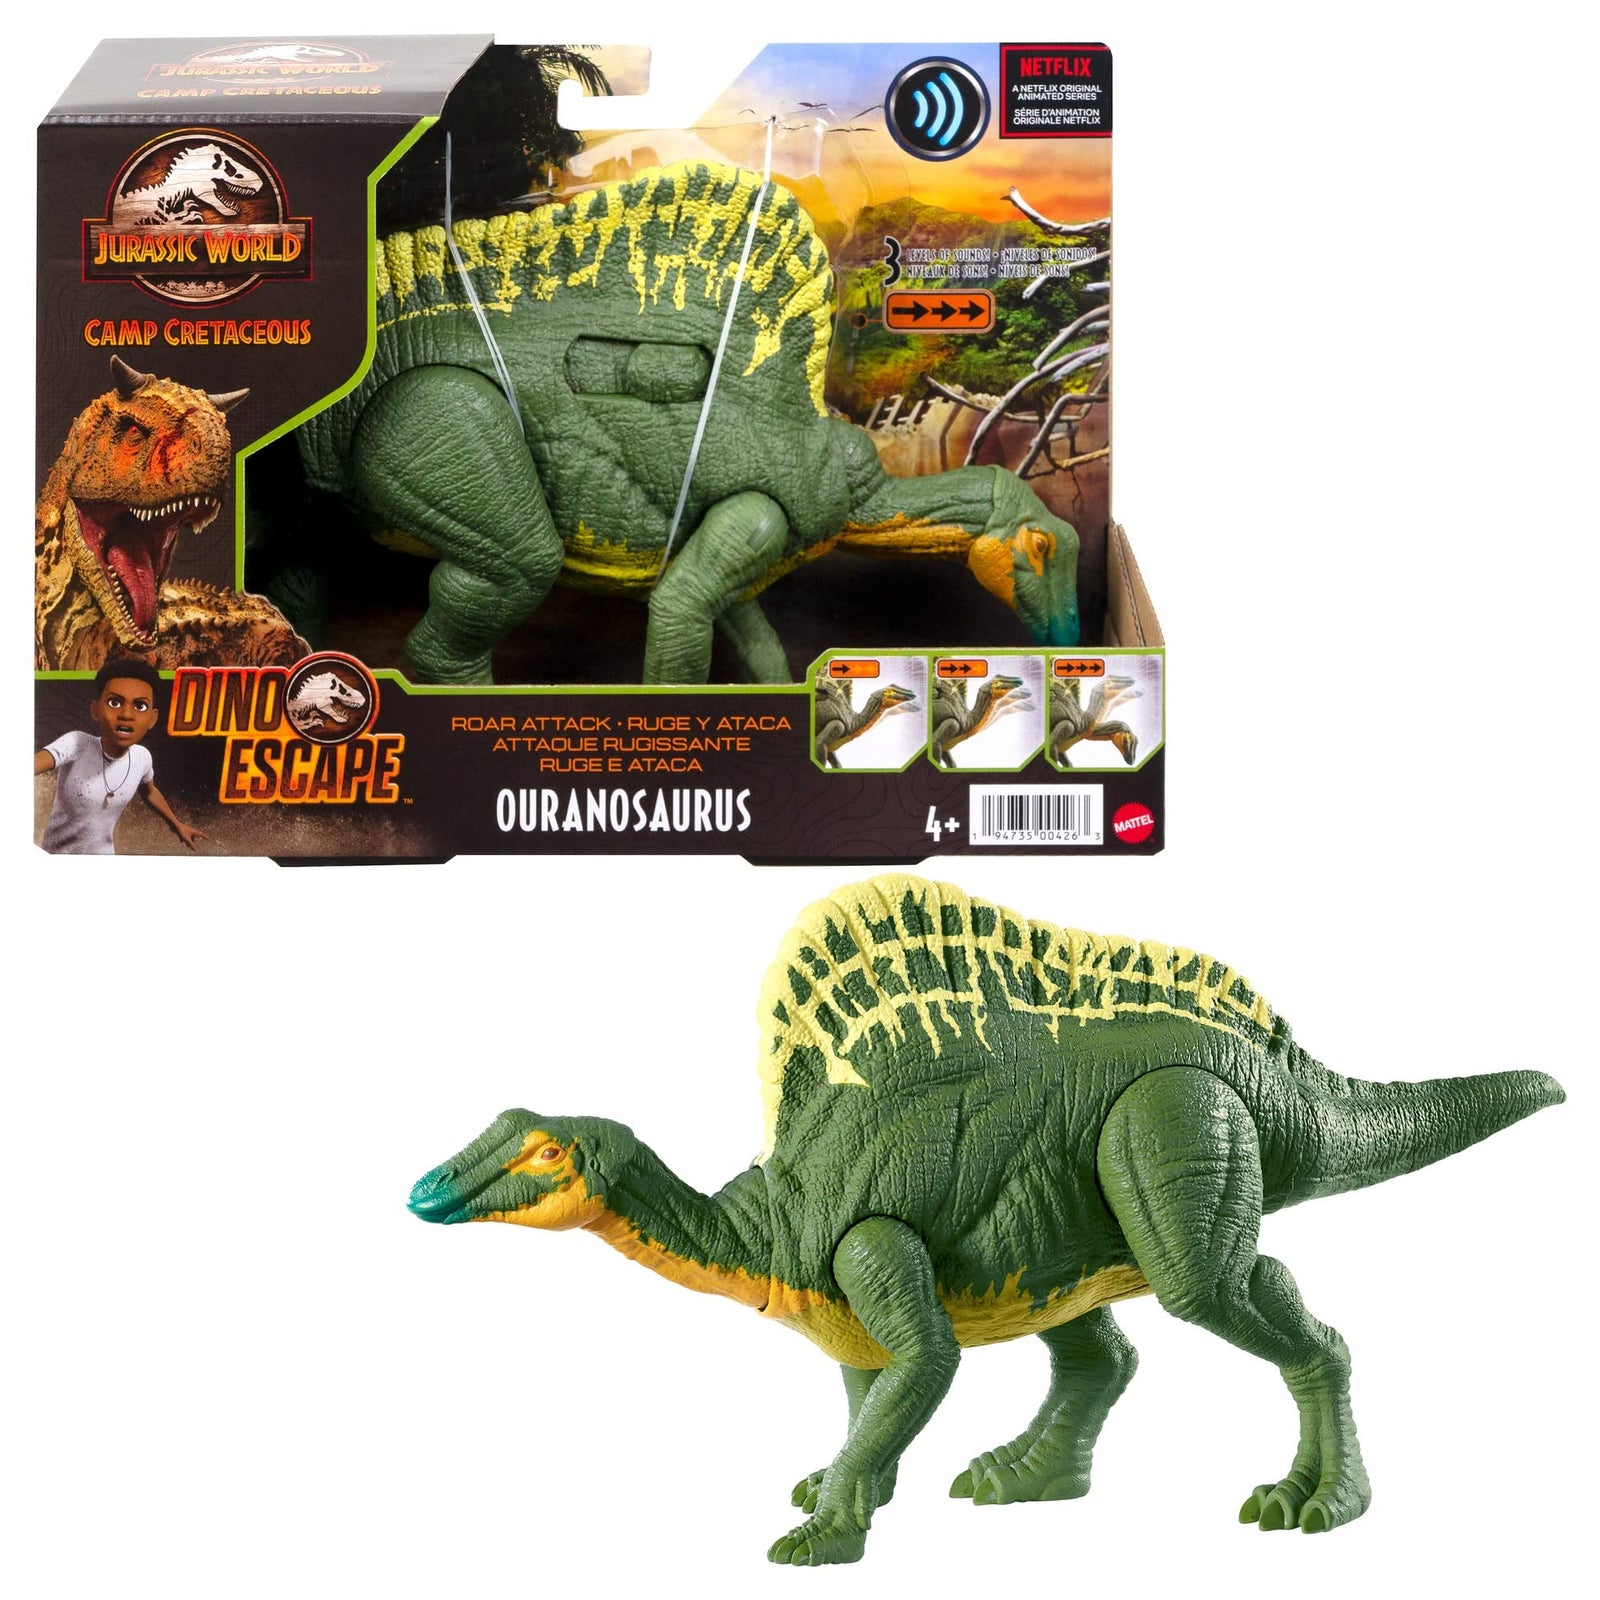 Jurassic World Roar Attack Ouranosaurus Camp Cretaceous Dinosaur Figure with Movable Joints, Realistic Sculpting, Strike Feature & Sounds, Herbivore, Kids Gift 4 Years & Up